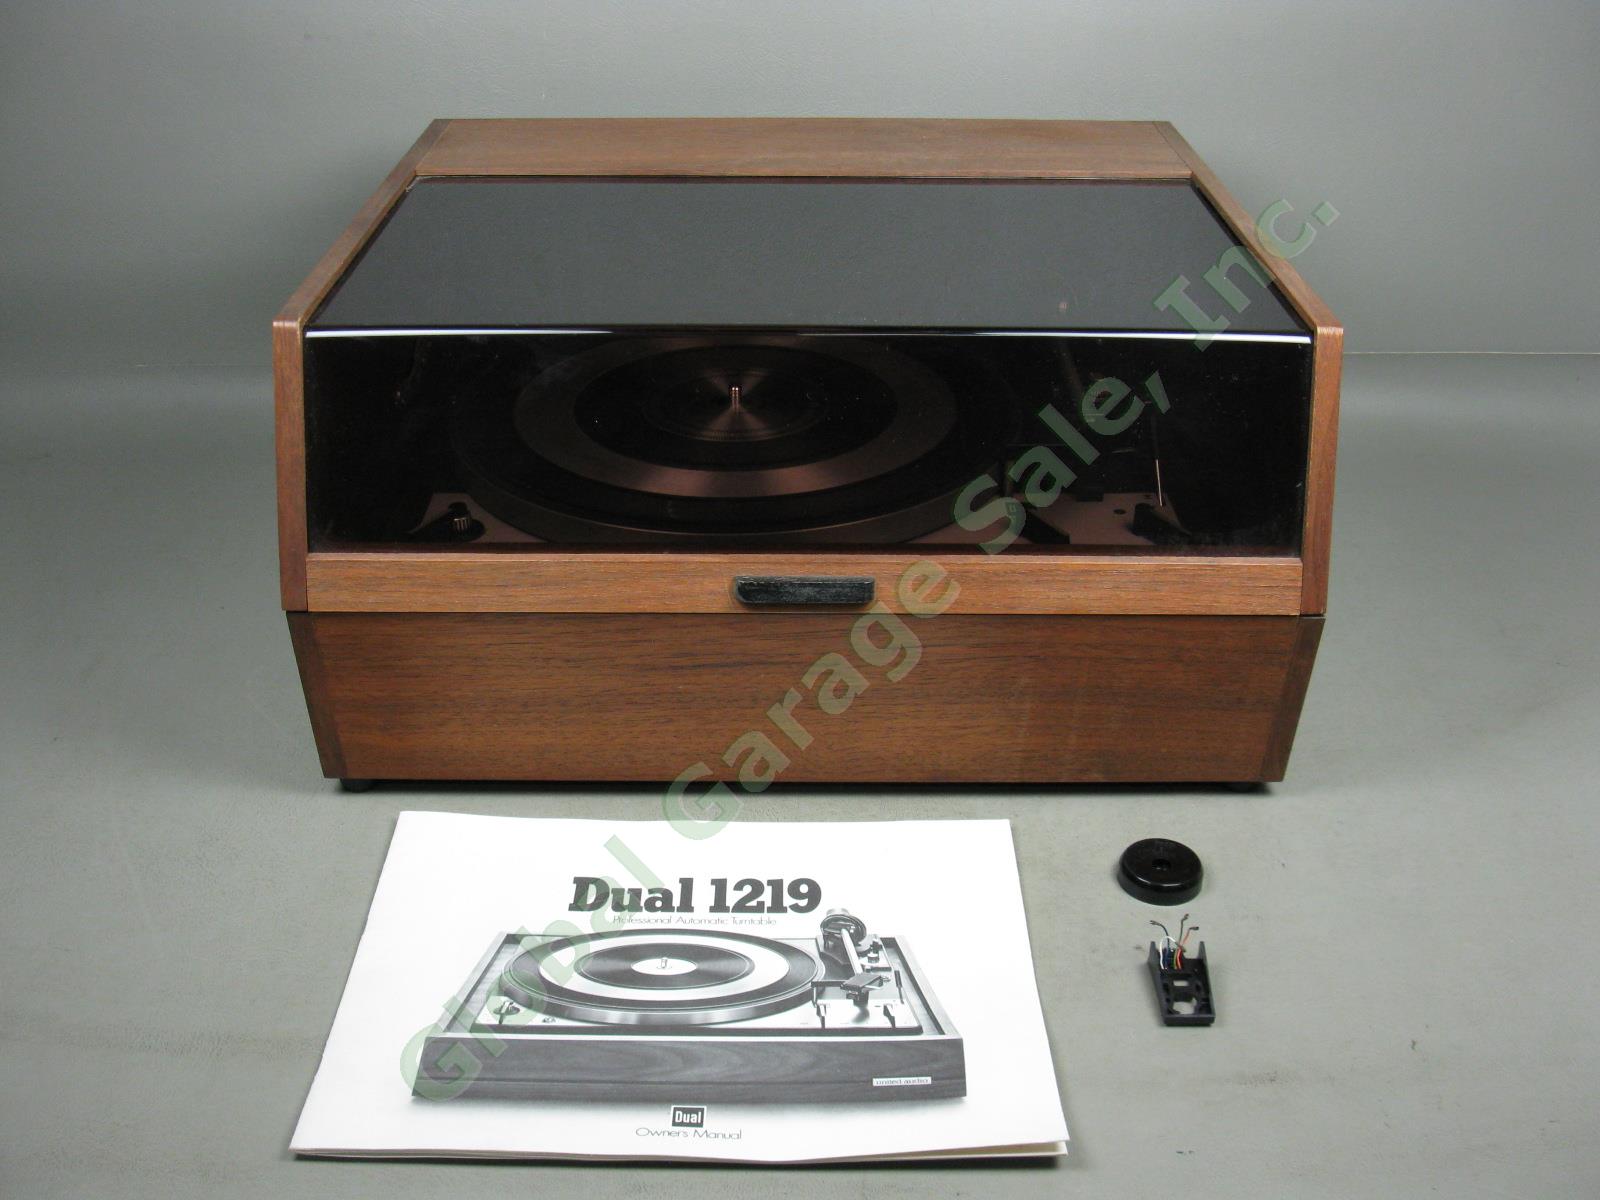 Vtg Dual 1219 Turntable + Wood Plinth Dust Cover Display Cabinet Case Manual Lot